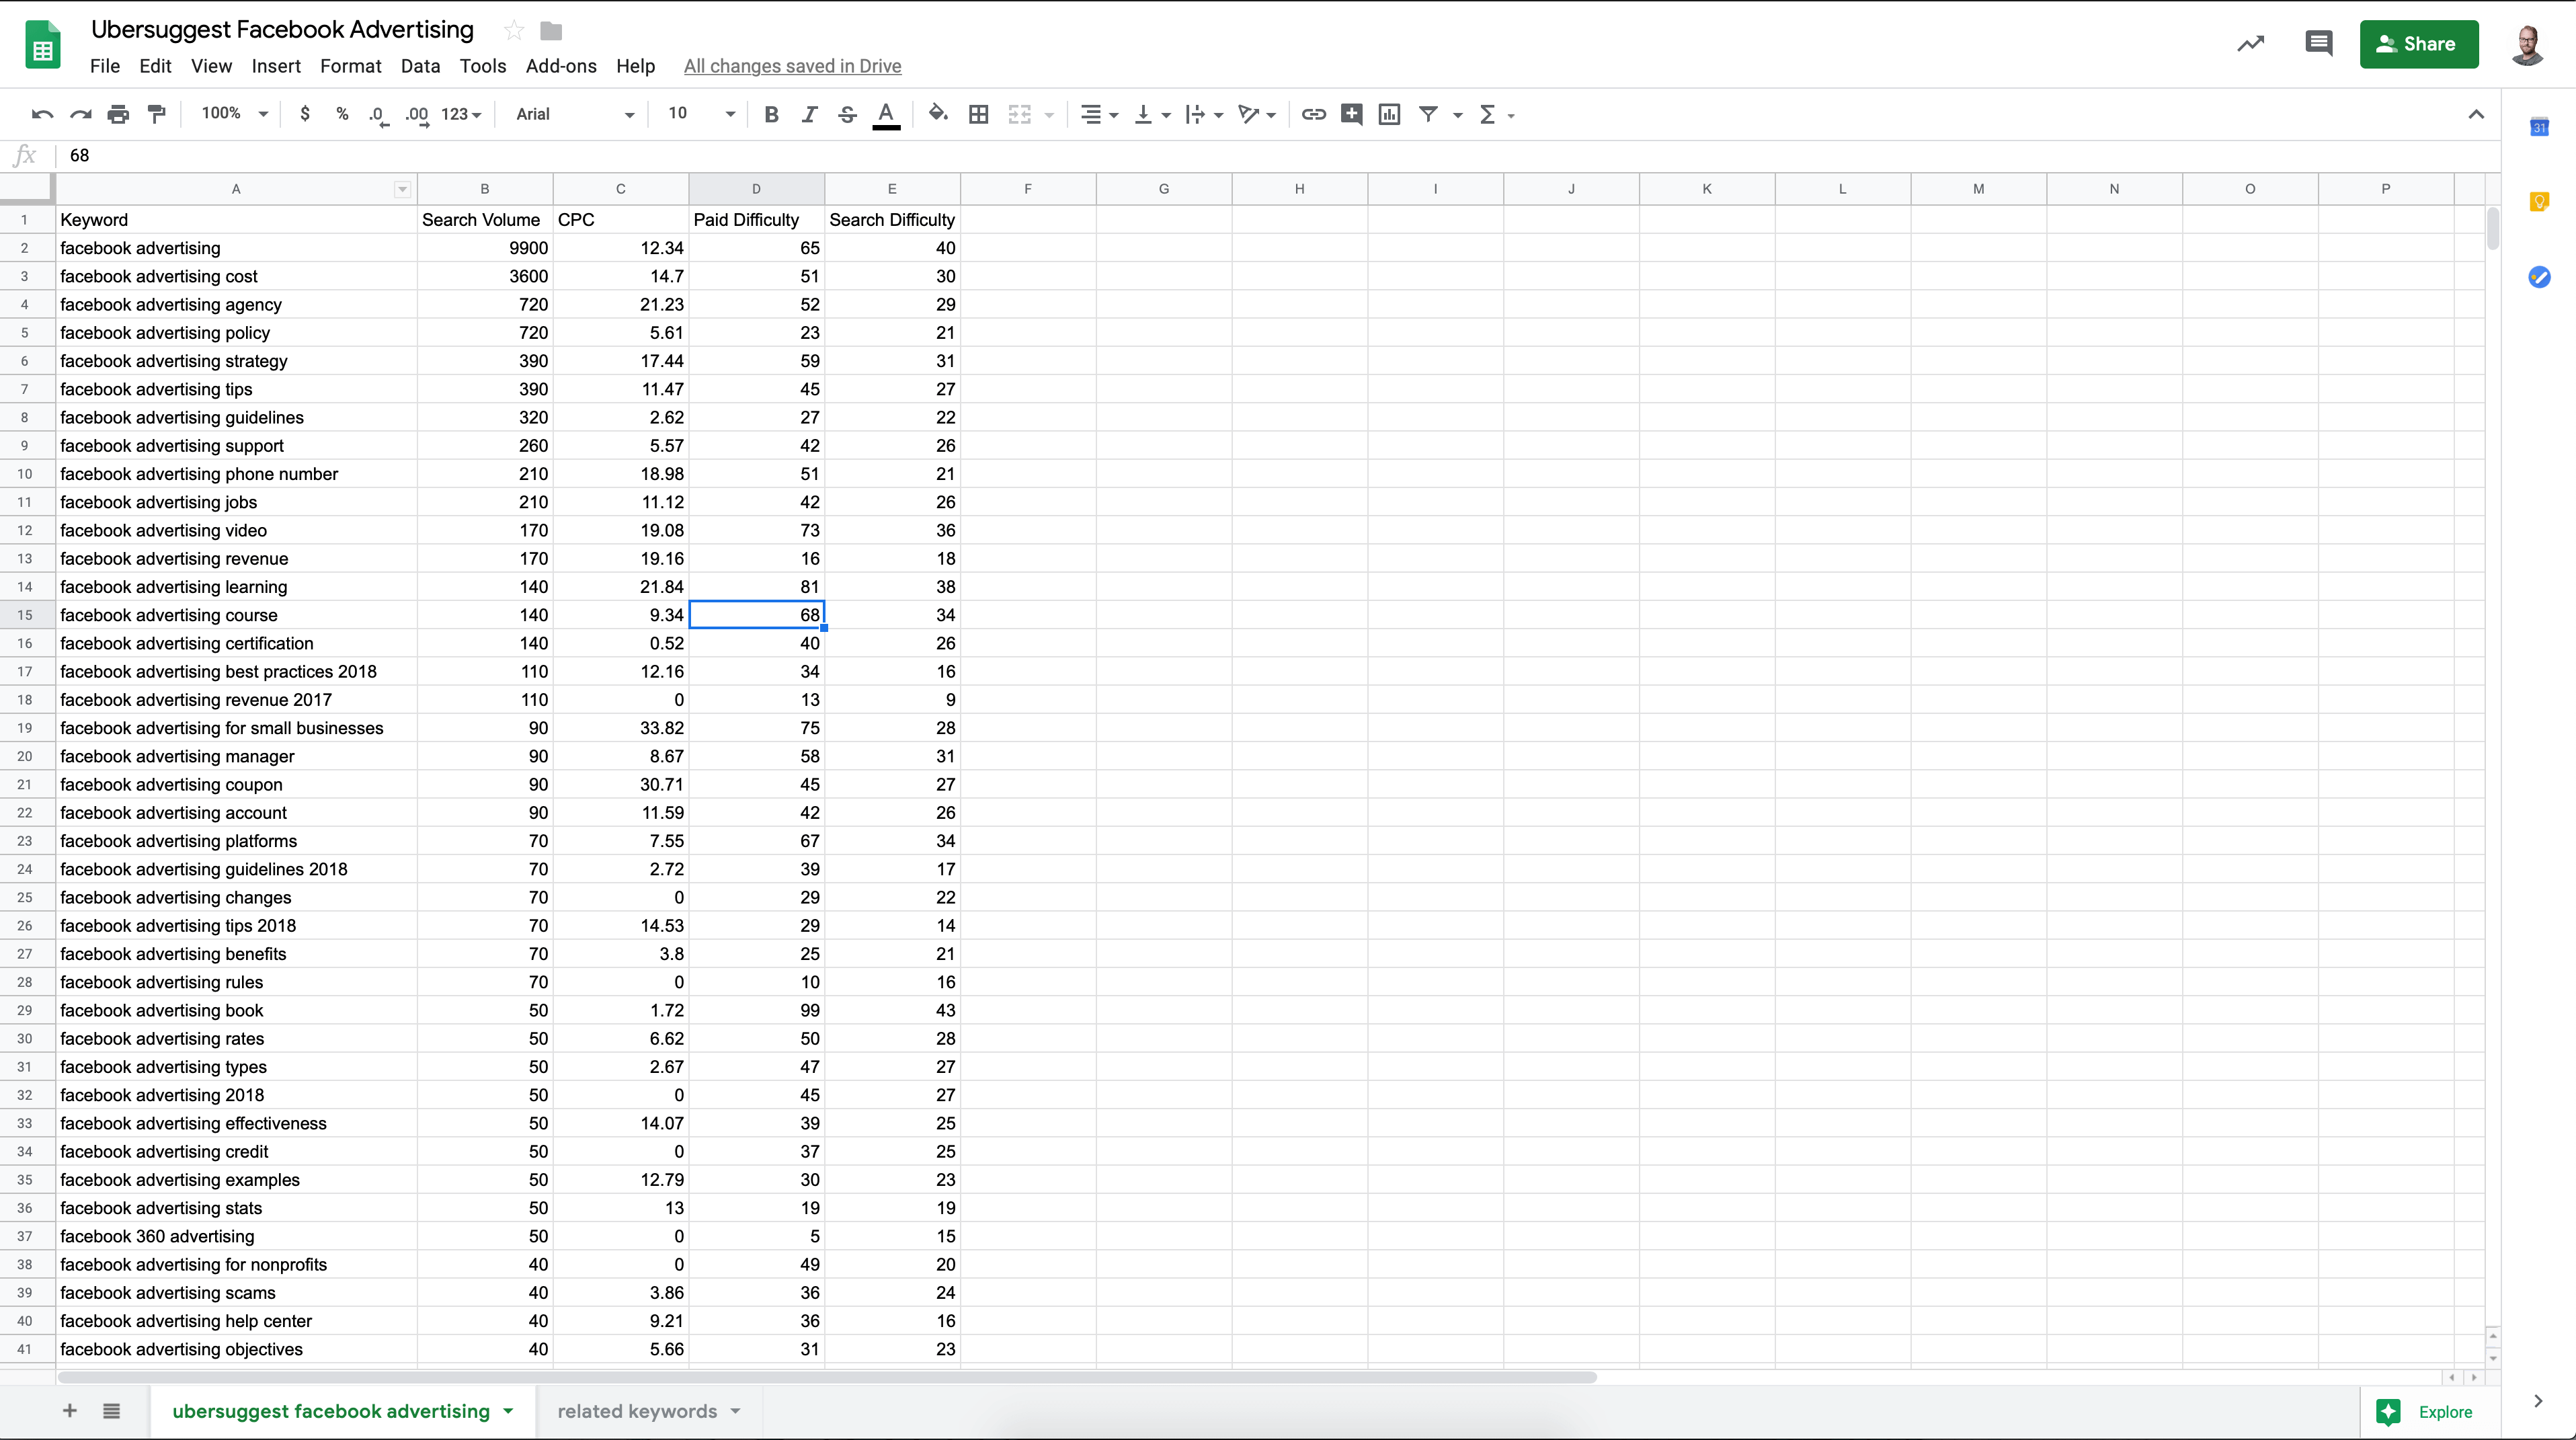 showing Ubersuggest data in Google Sheets